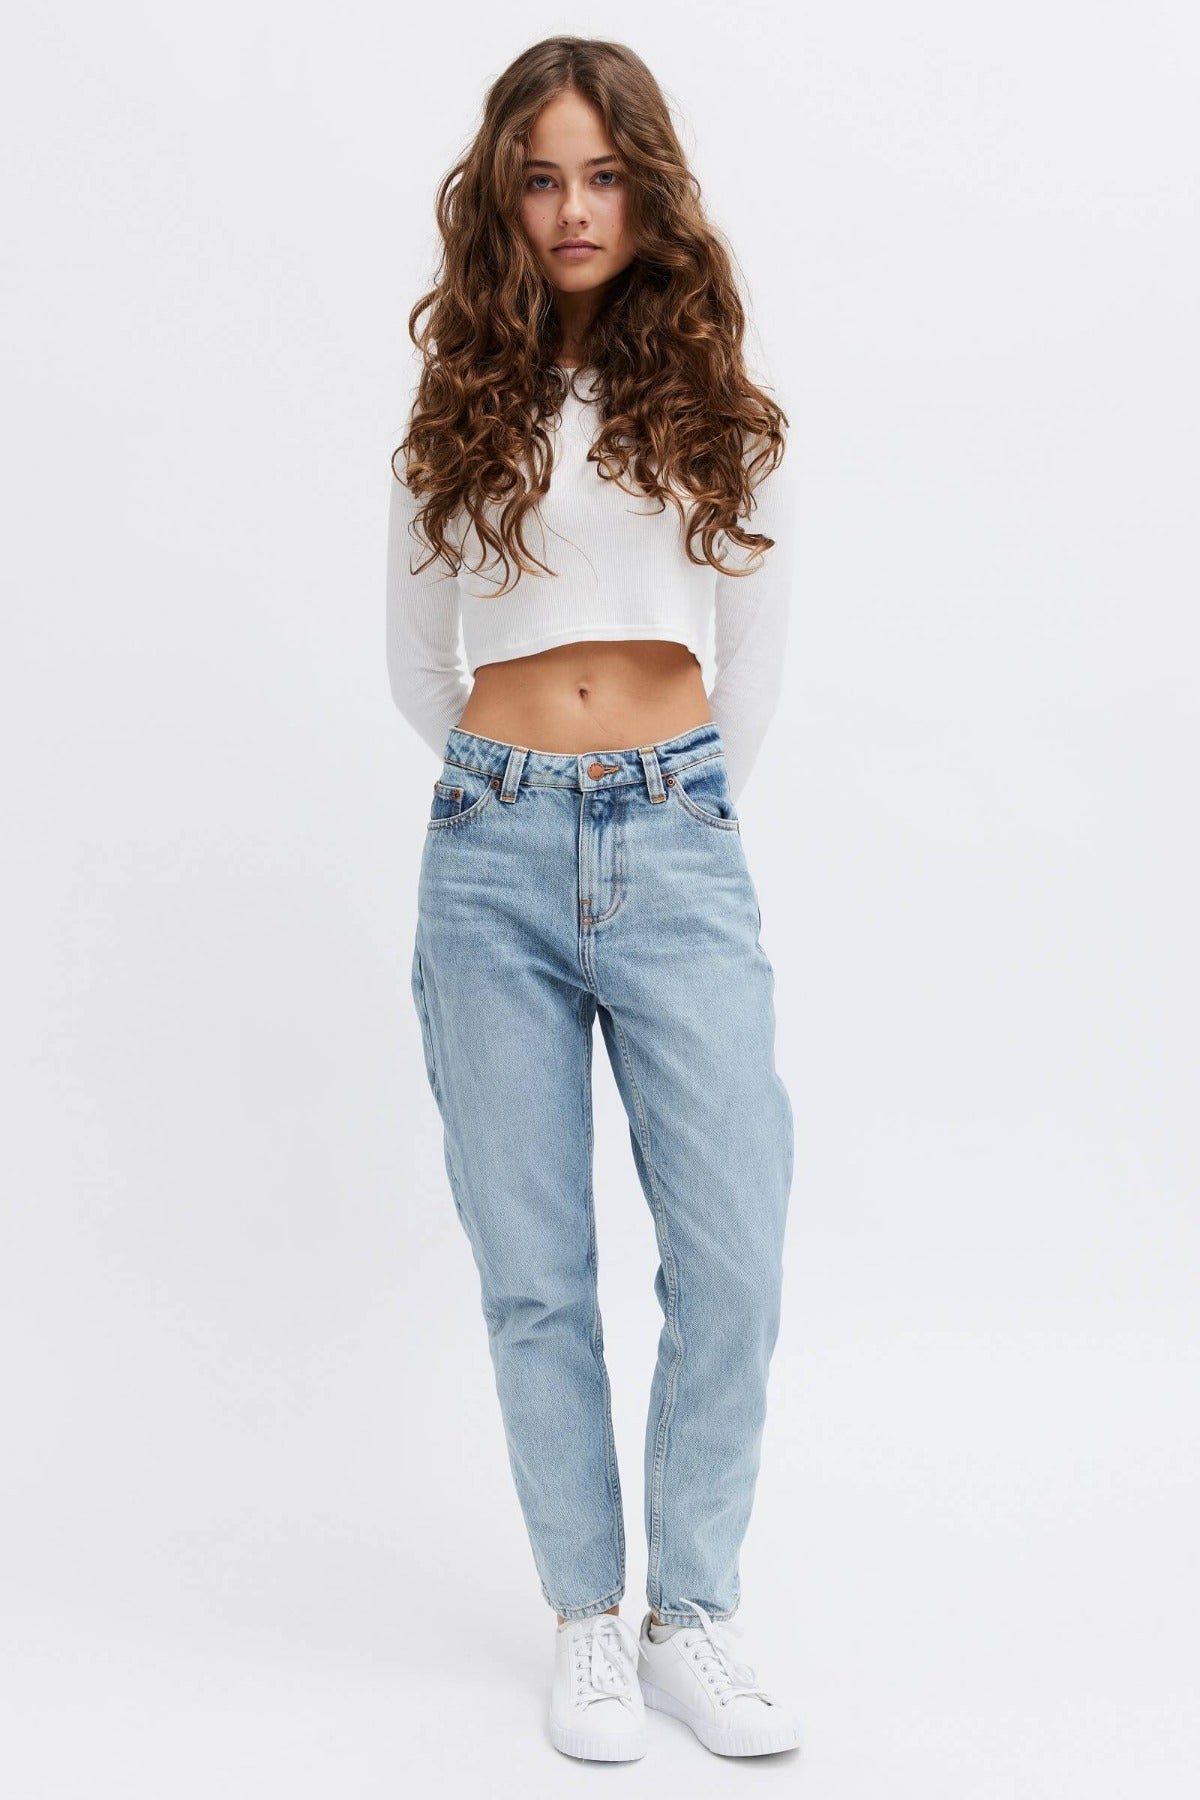 female jeans, comfy, loose style. ethical fashion- Organsk